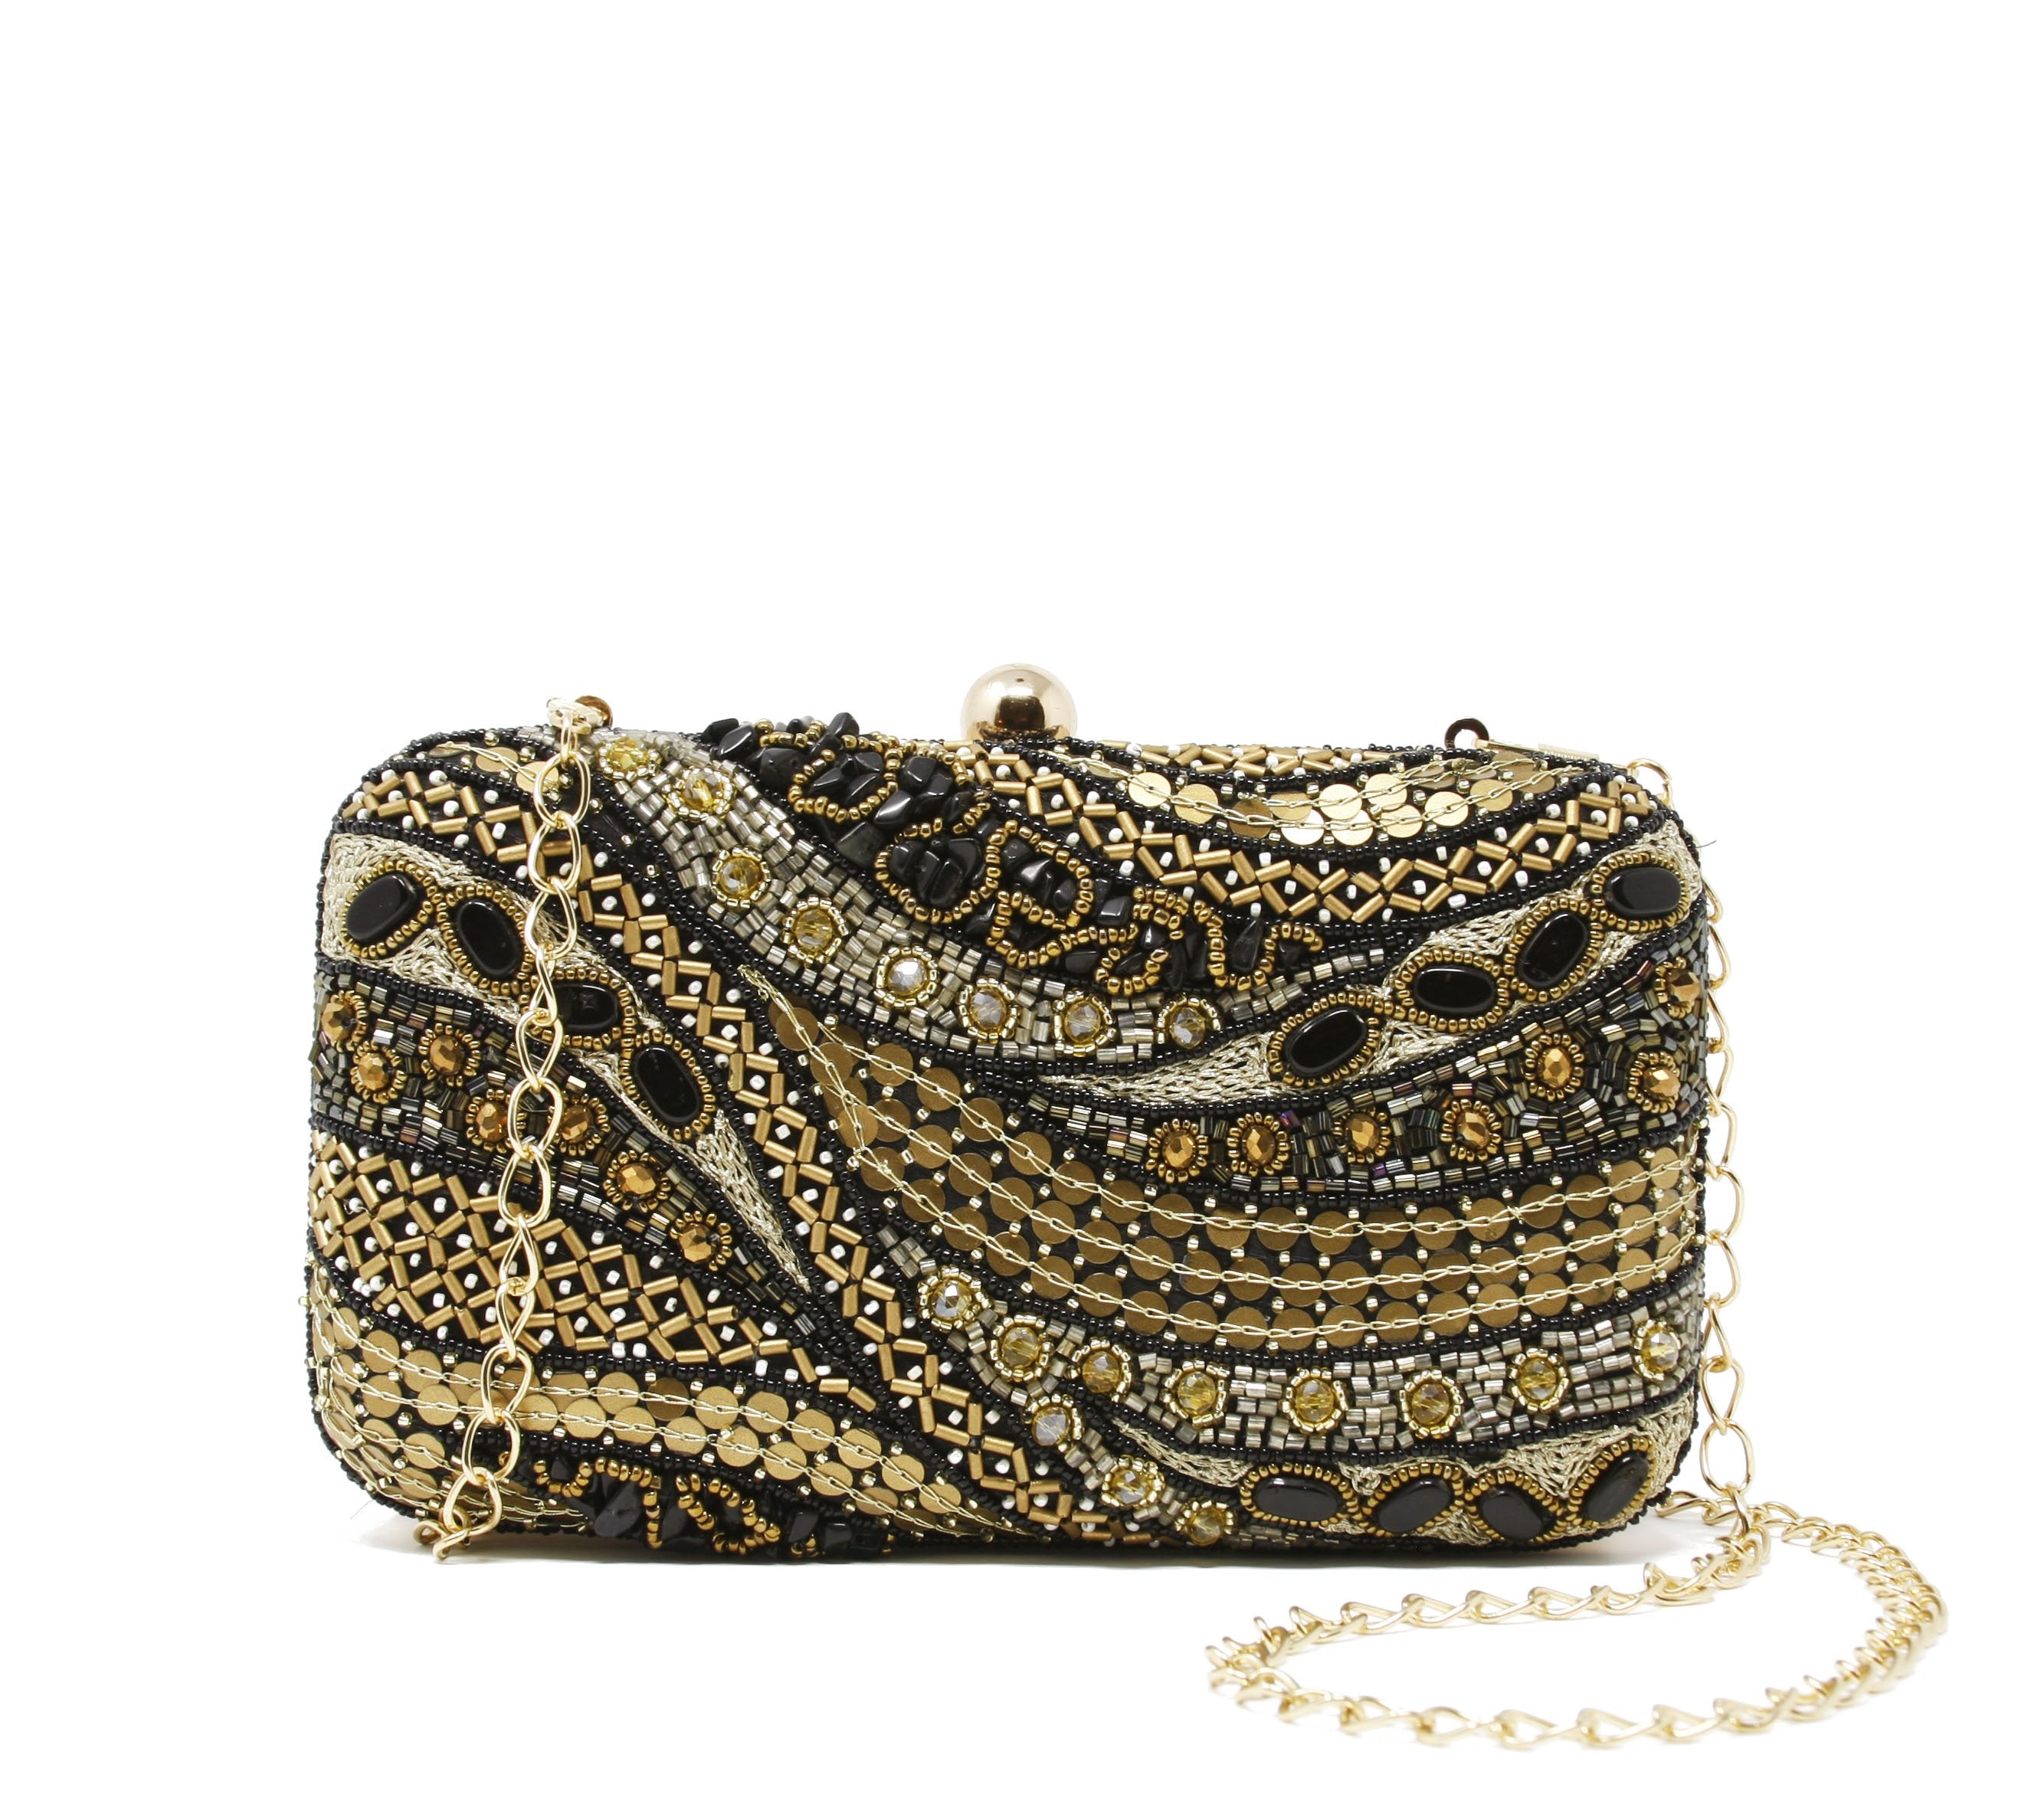 Black woven fabric evening bag with gold chain strap  23" drop for shoulder or crossbody wear.